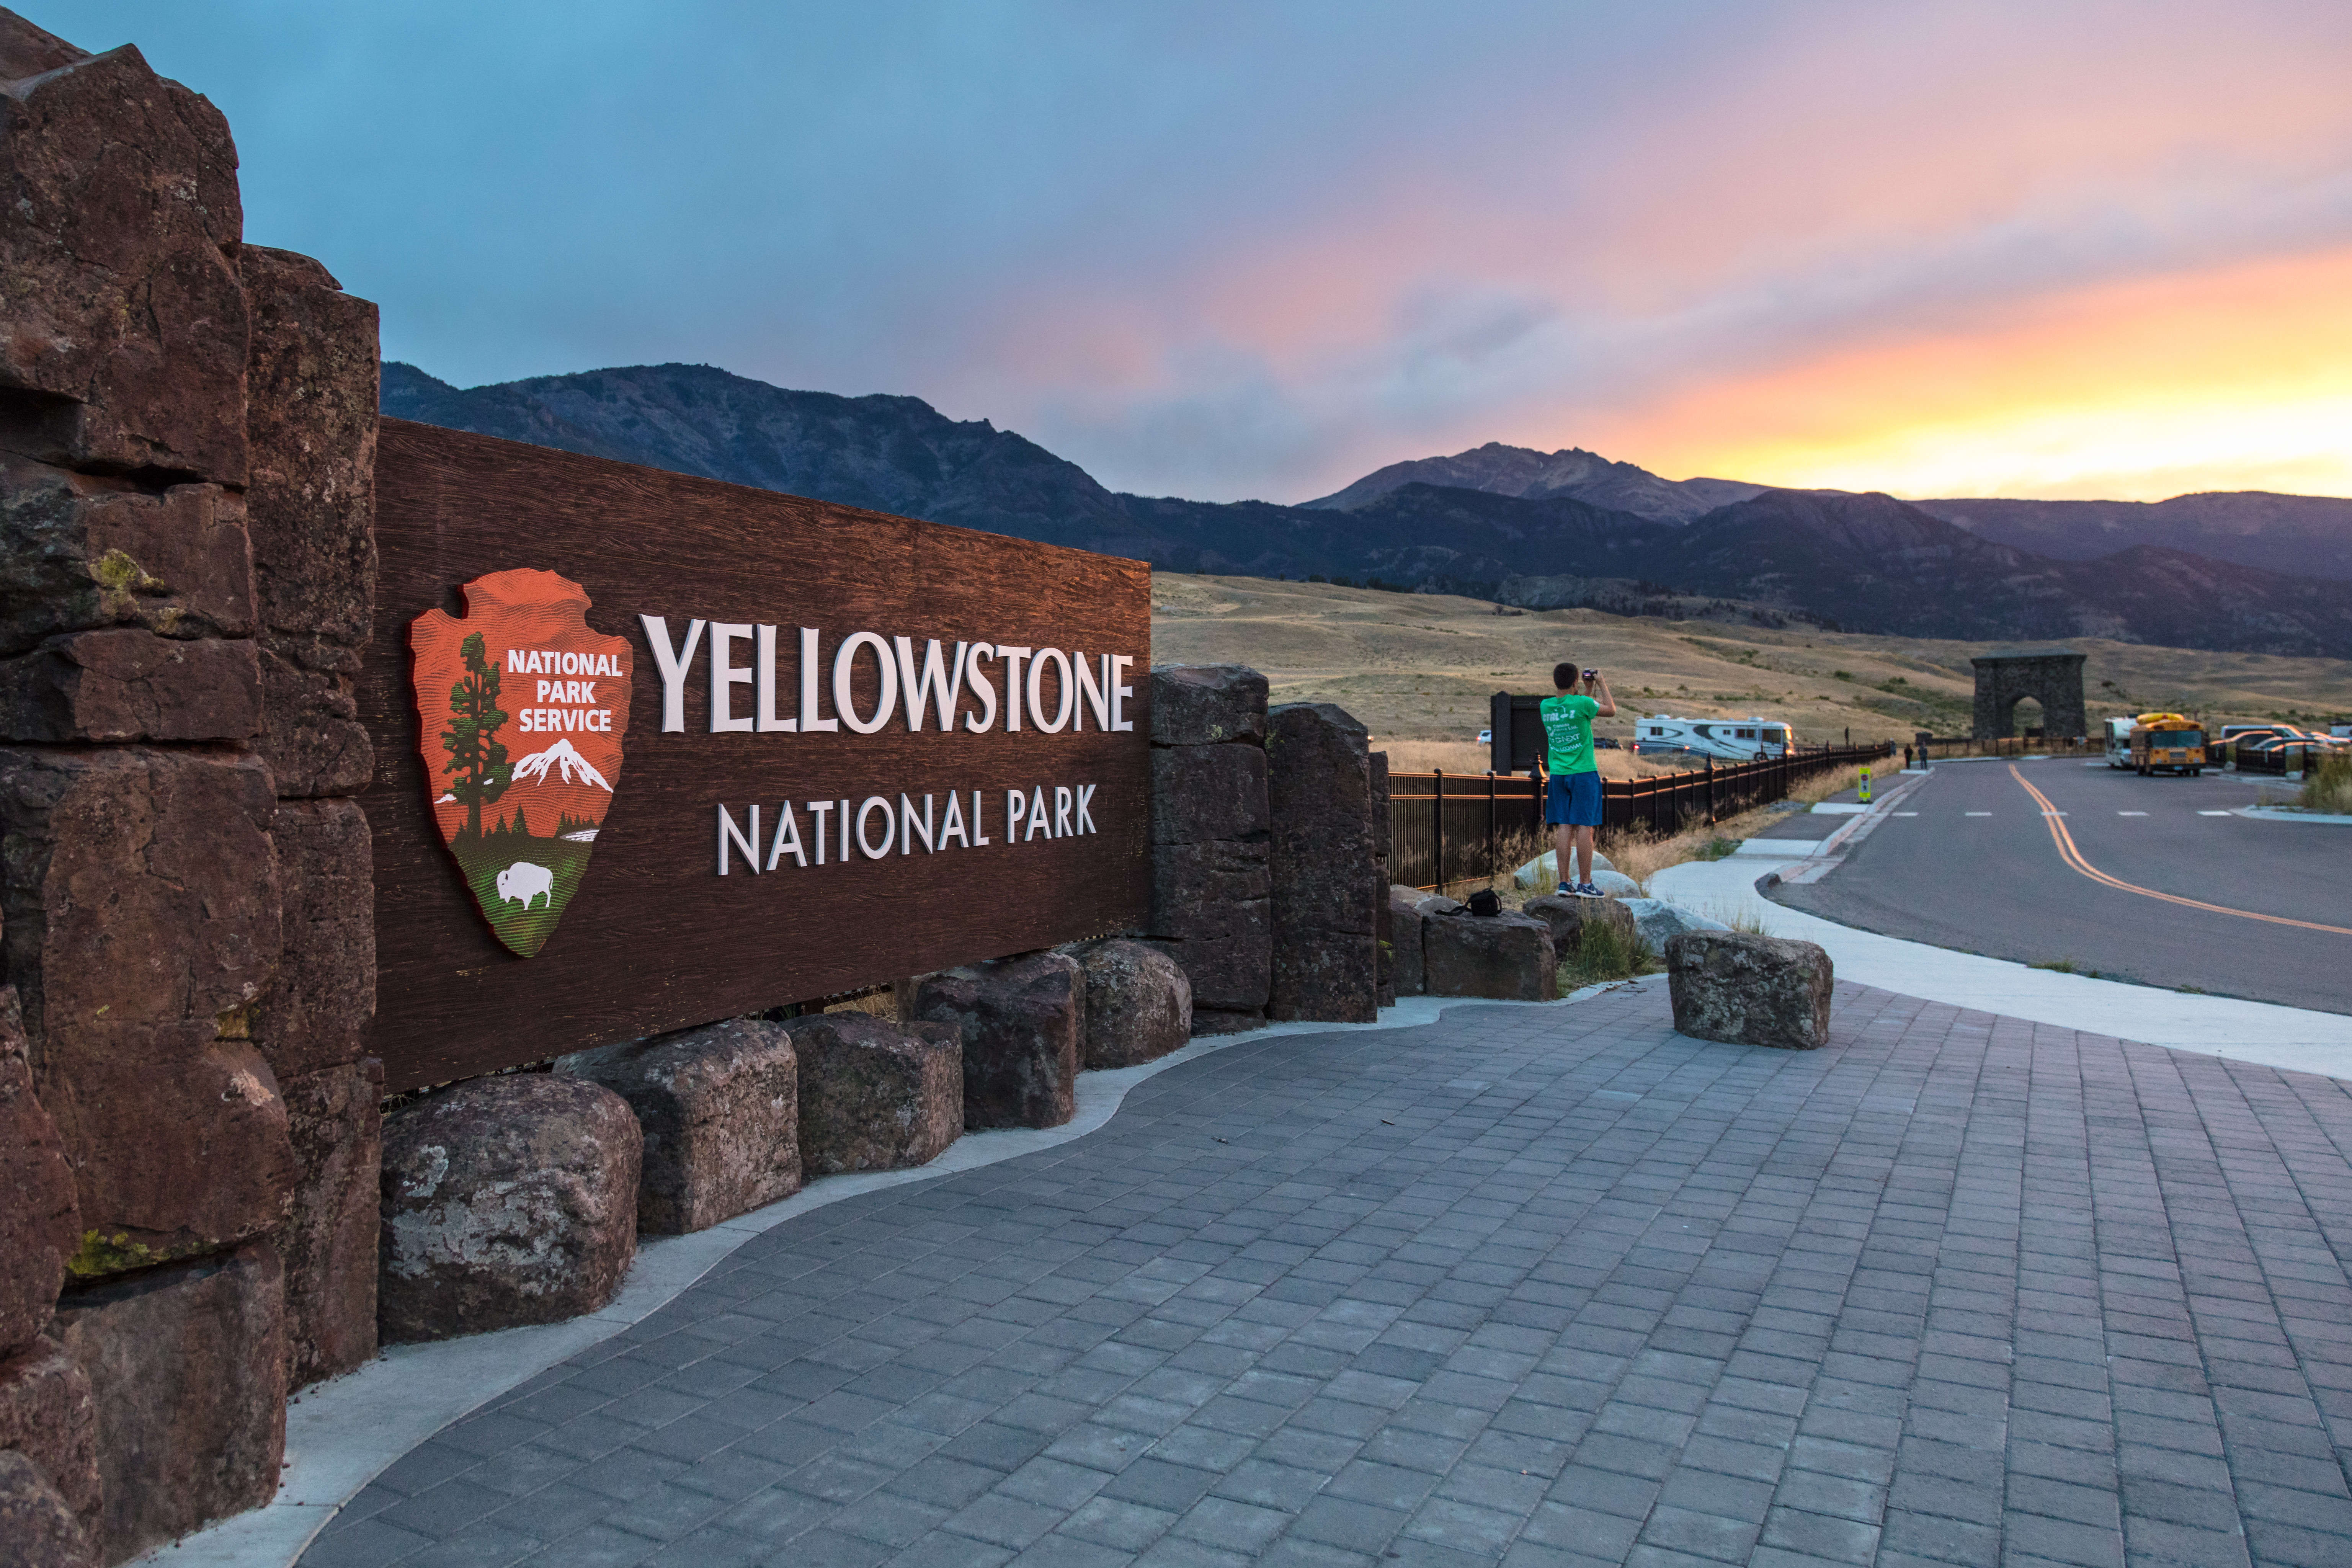 A large Yellowstone National Park sign in front of mountains at sunset